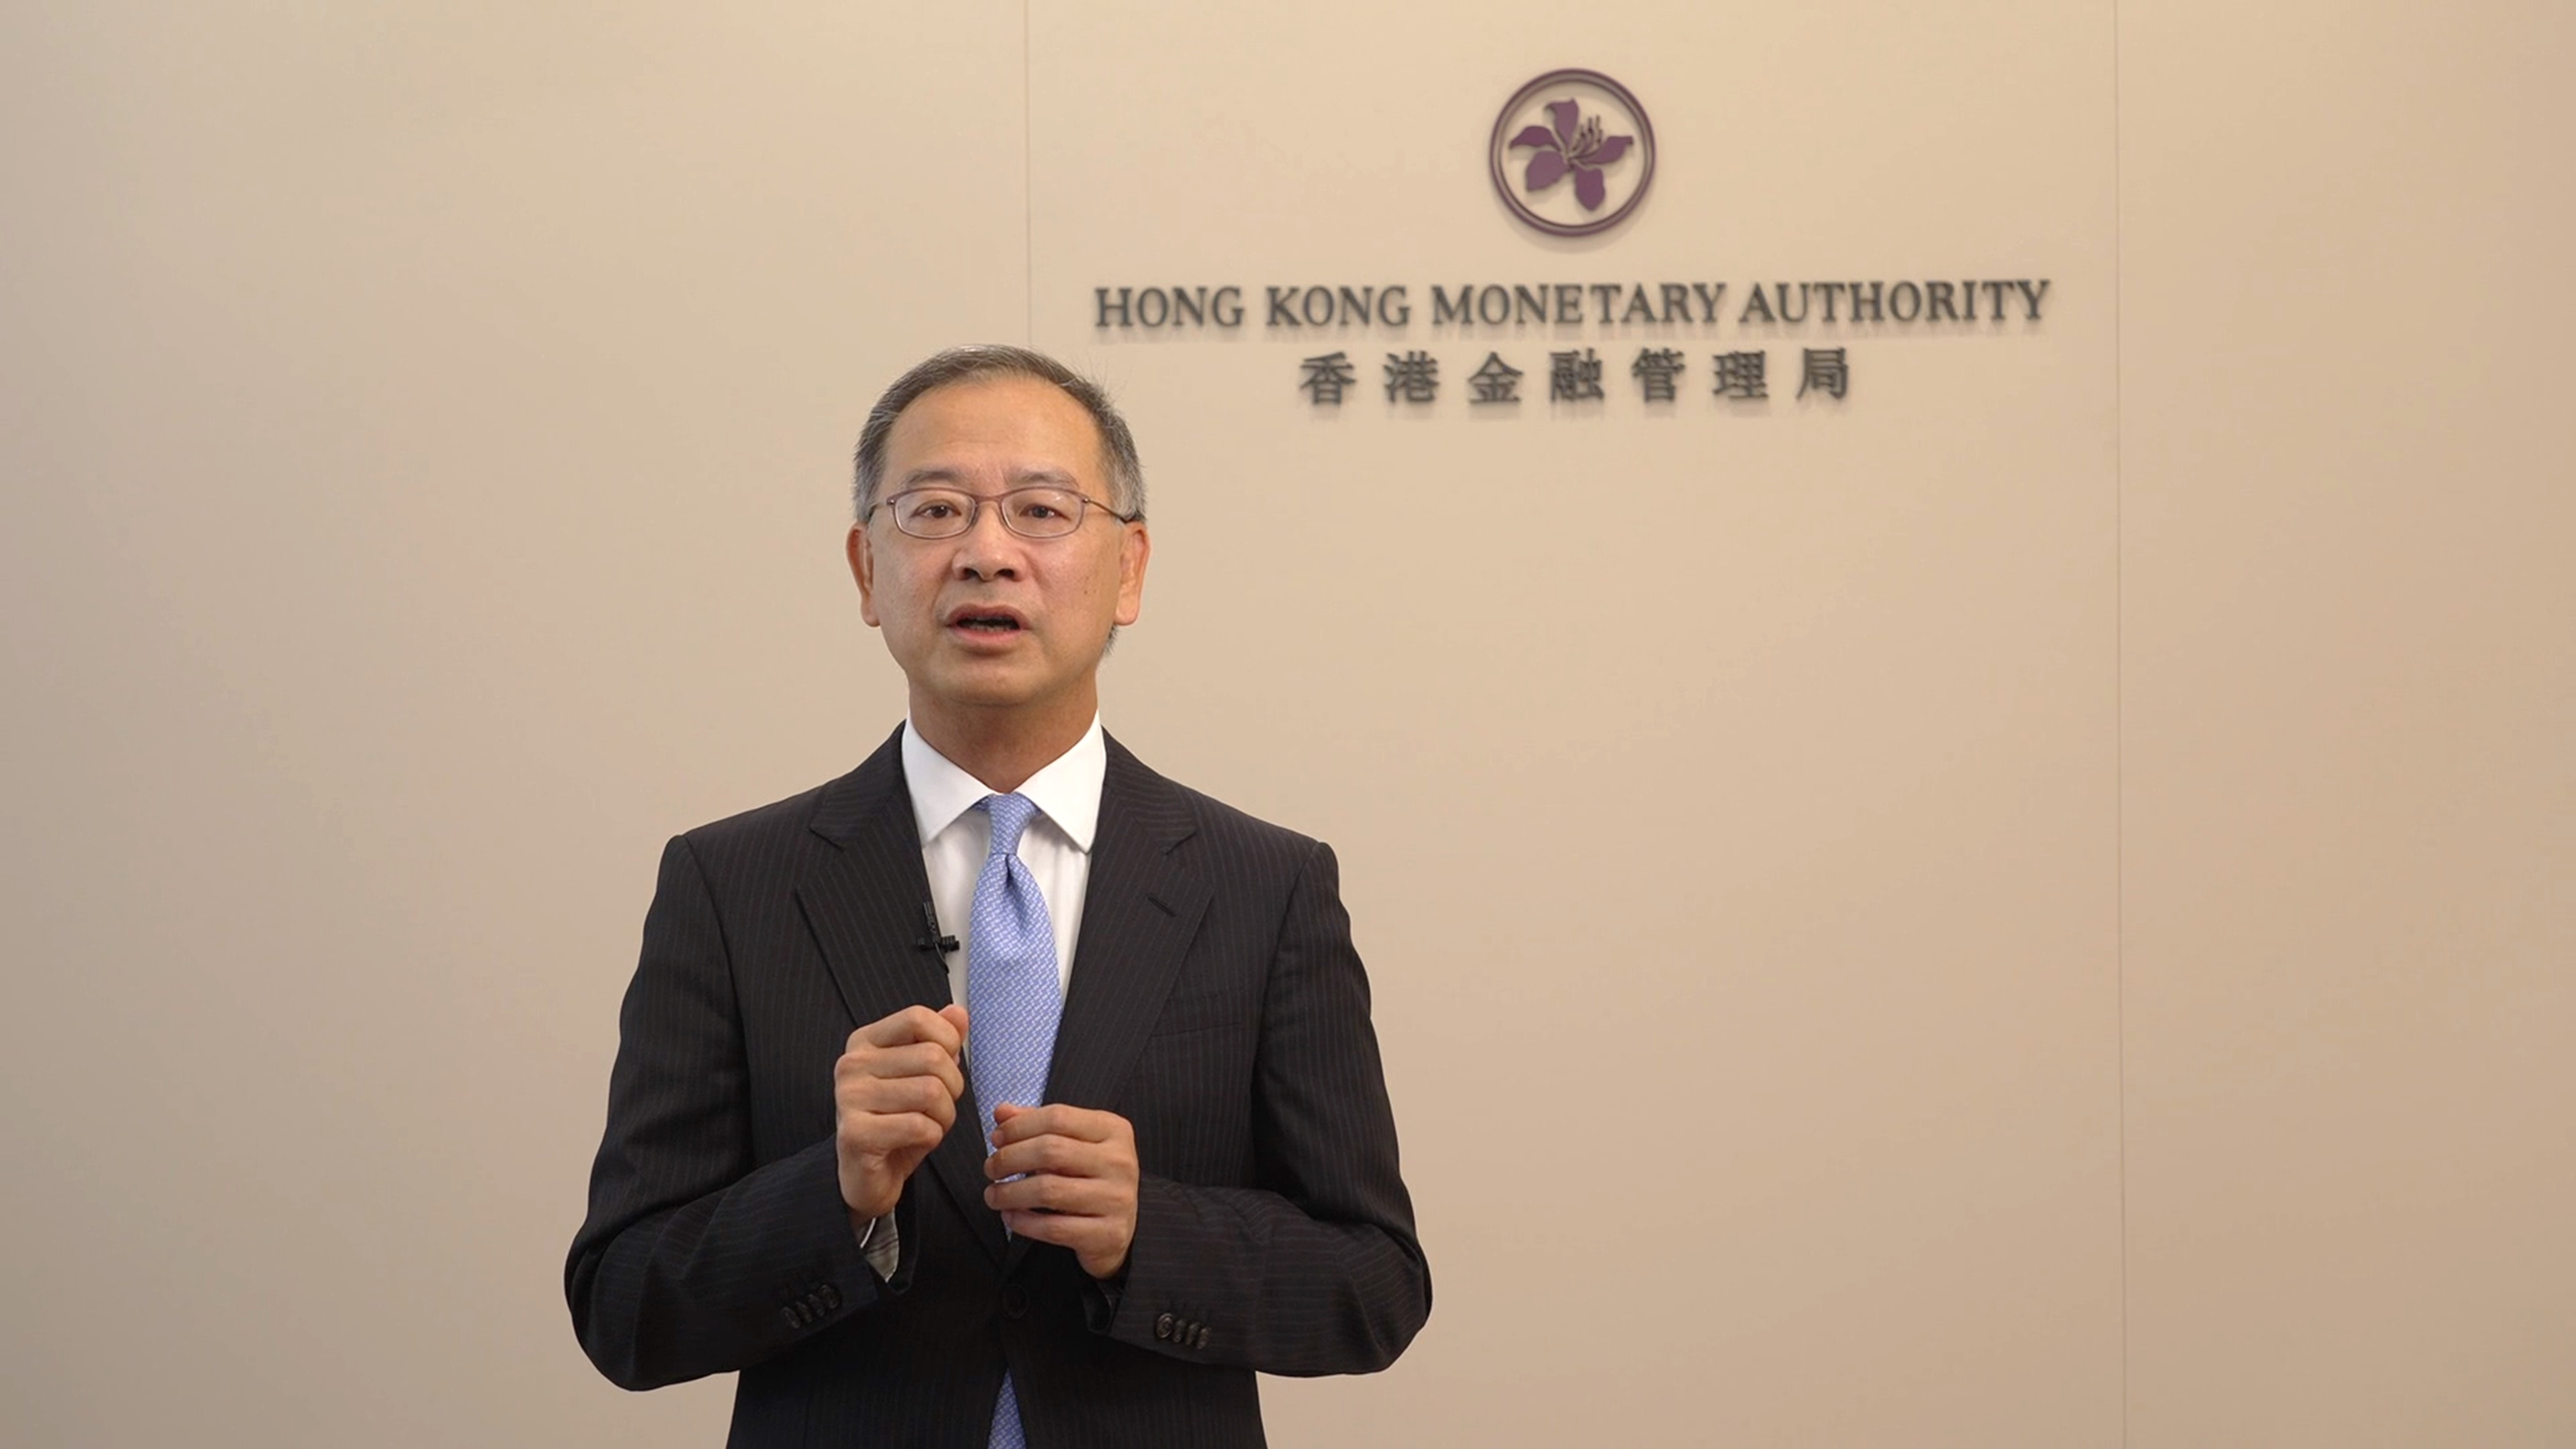 Mr Eddie Yue, Chief Executive of the Hong Kong Monetary Authority says that the Fintech Innovation Supervisory Cooperation, in the form of a “network link-up”, will allow the Guangdong-Hong Kong-Macao Greater Bay Area to reinforce its leading Fintech position and facilitate innovation in the region.